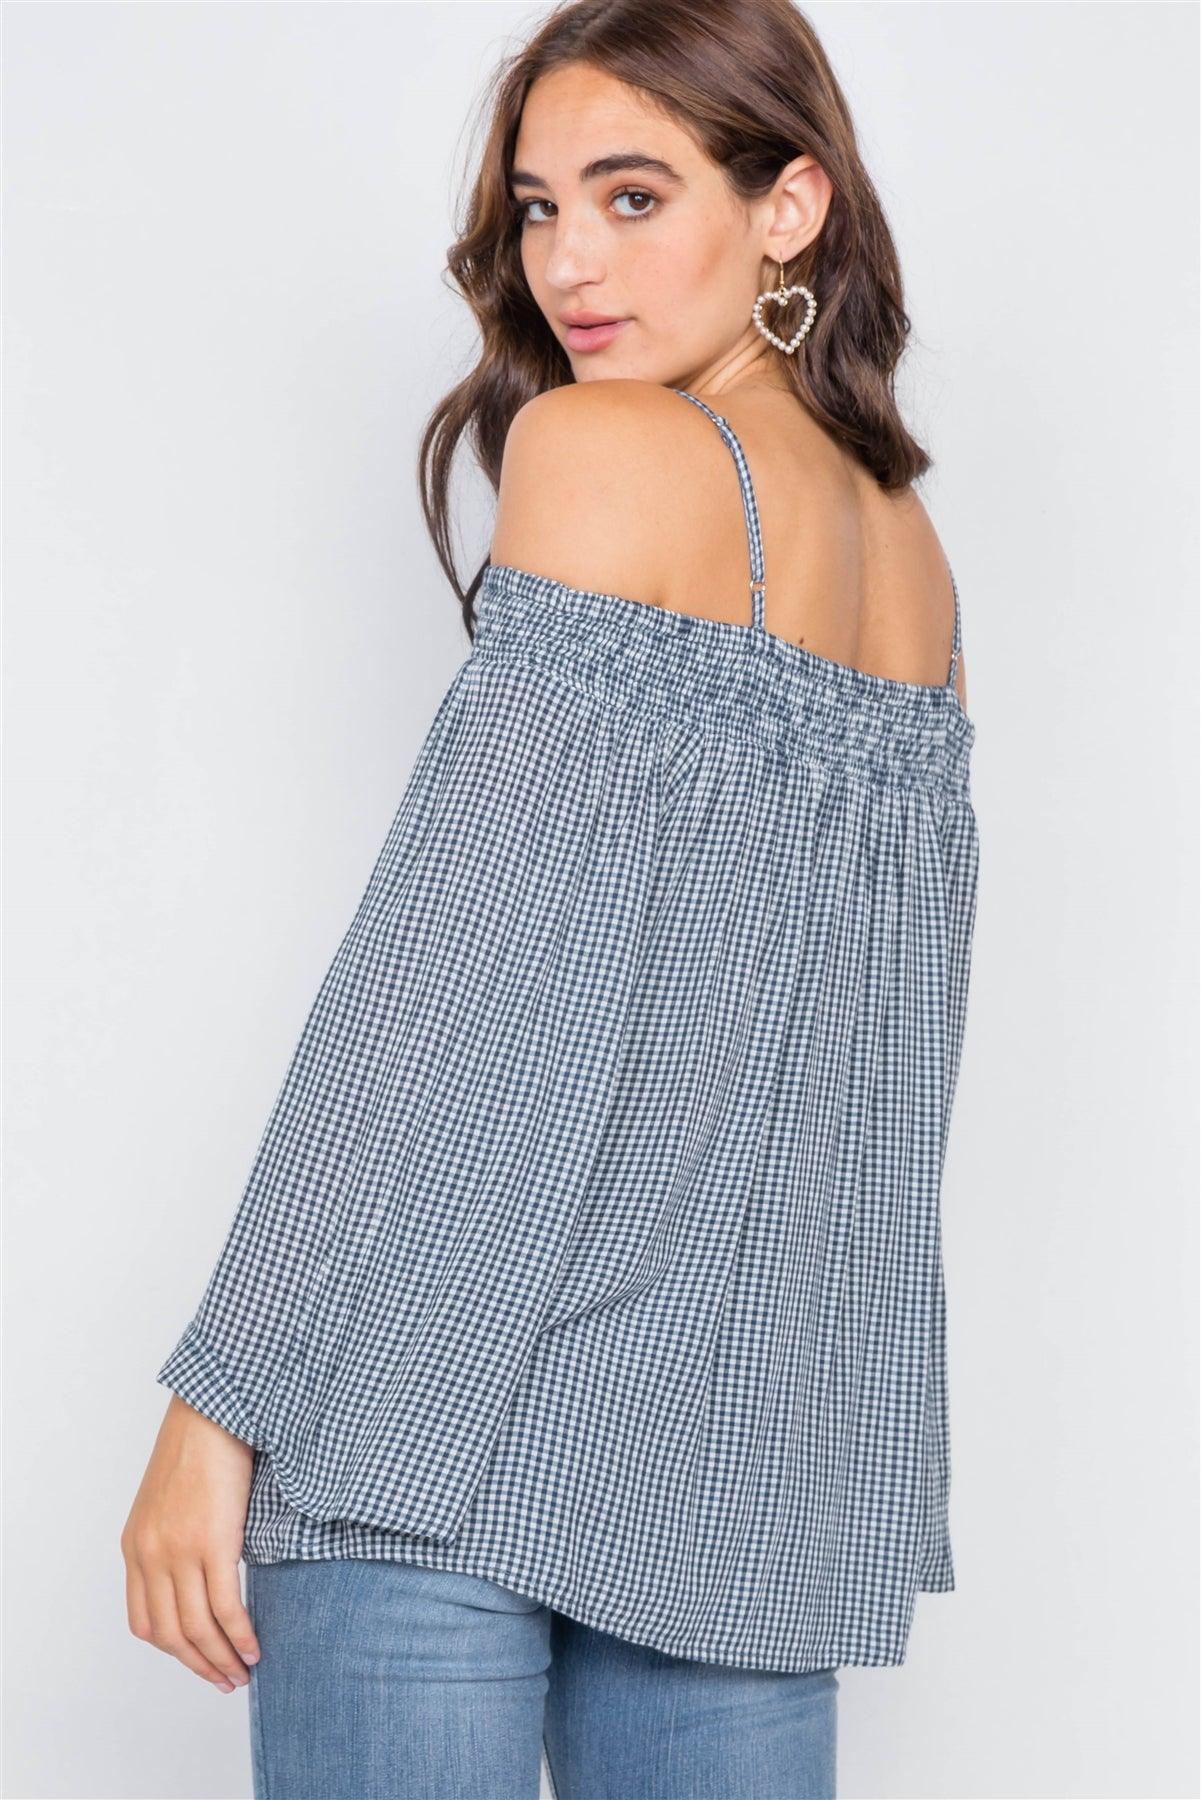 Navy & White Gingham Plaid Off-The-Shoulder Top /2-2-2